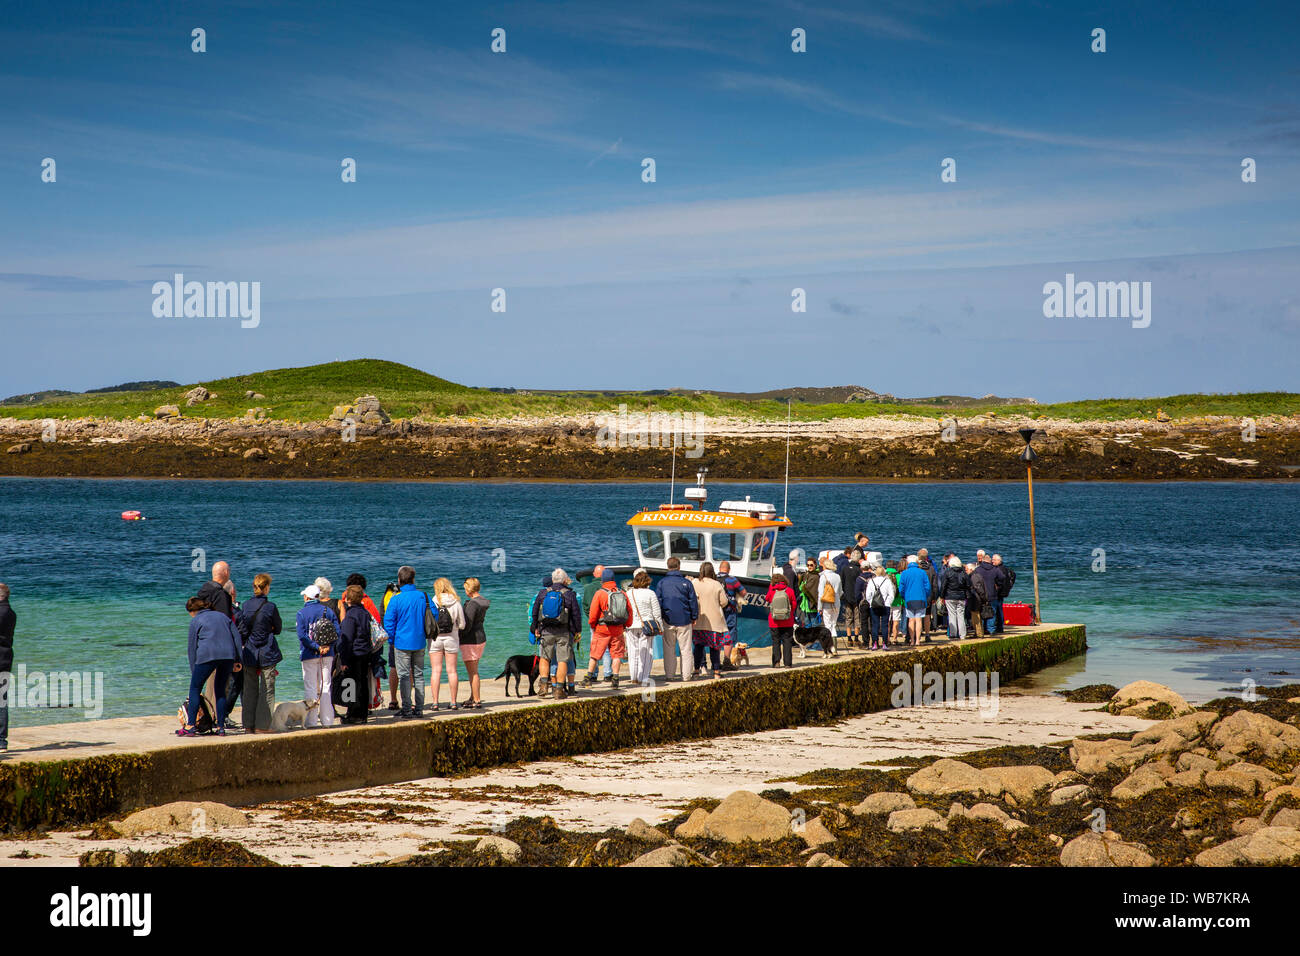 UK, England, Scilly Islands, St Martin’s, Lower Town Harbour, passengers queueing on quay to board inter-island boat Kingfisher Stock Photo